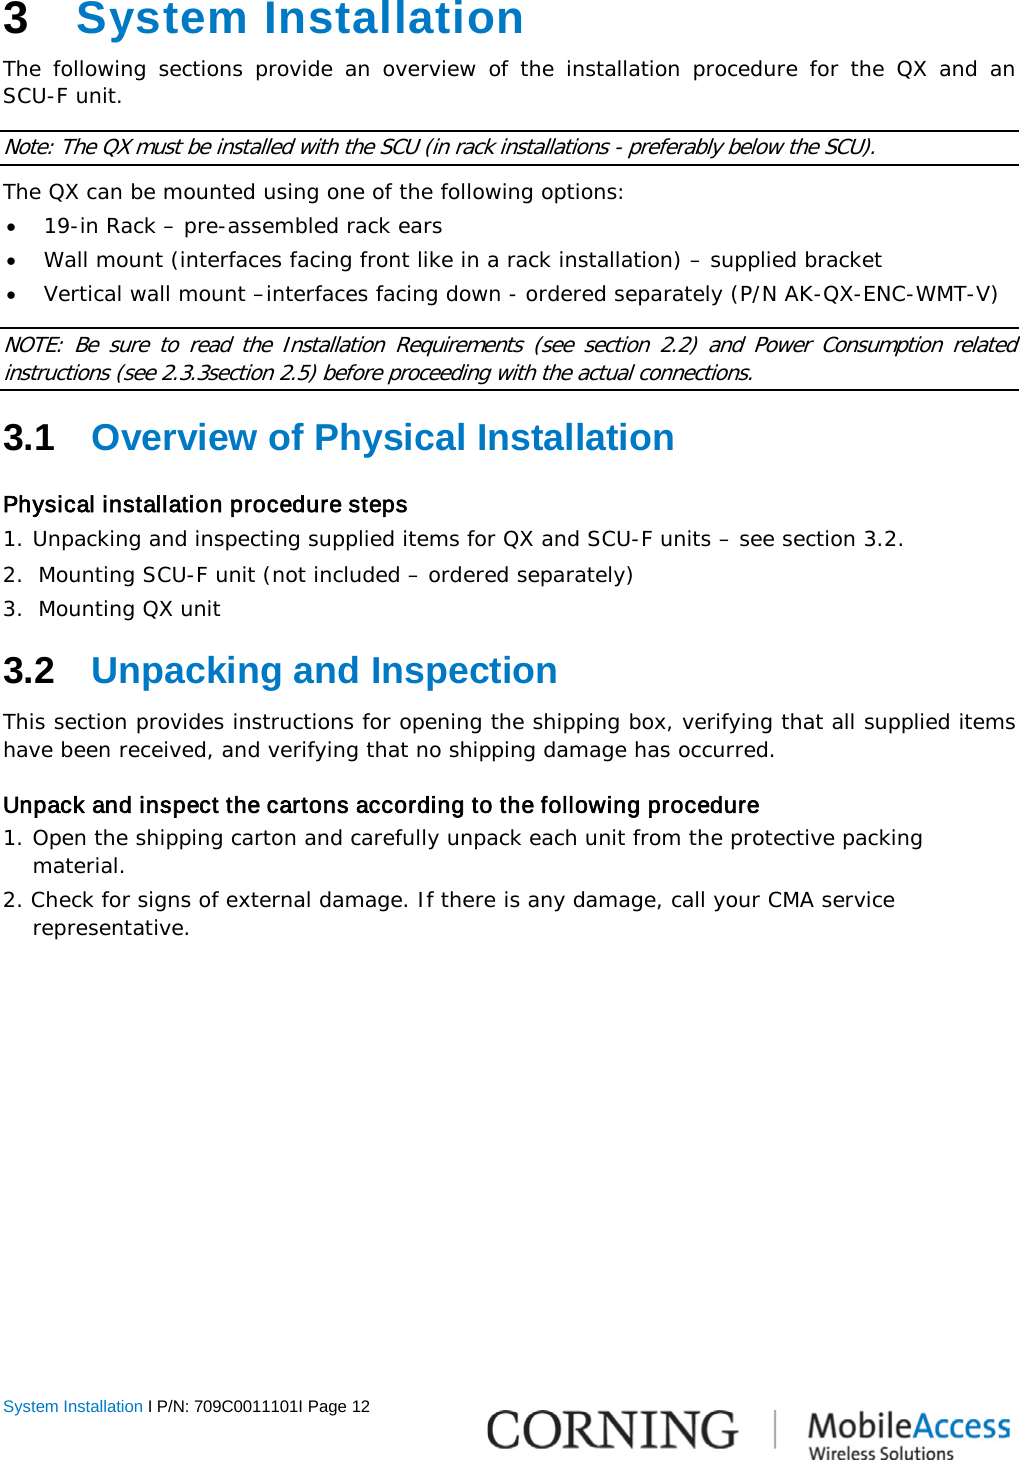  System Installation I P/N: 709C0011101I Page 12  3  System Installation The following sections provide an overview of the installation procedure for the QX and an  SCU-F unit. Note: The QX must be installed with the SCU (in rack installations - preferably below the SCU). The QX can be mounted using one of the following options: • 19-in Rack – pre-assembled rack ears • Wall mount (interfaces facing front like in a rack installation) – supplied bracket • Vertical wall mount –interfaces facing down - ordered separately (P/N AK-QX-ENC-WMT-V) NOTE: Be sure to read the Installation  Requirements (see section  2.2)  and Power Consumption related instructions (see  2.3.3section  2.5) before proceeding with the actual connections.  3.1  Overview of Physical Installation Physical installation procedure steps 1. Unpacking and inspecting supplied items for QX and SCU-F units – see section  3.2. 2.  Mounting SCU-F unit (not included – ordered separately) 3.  Mounting QX unit 3.2  Unpacking and Inspection This section provides instructions for opening the shipping box, verifying that all supplied items have been received, and verifying that no shipping damage has occurred.  Unpack and inspect the cartons according to the following procedure 1. Open the shipping carton and carefully unpack each unit from the protective packing material. 2. Check for signs of external damage. If there is any damage, call your CMA service     representative.    